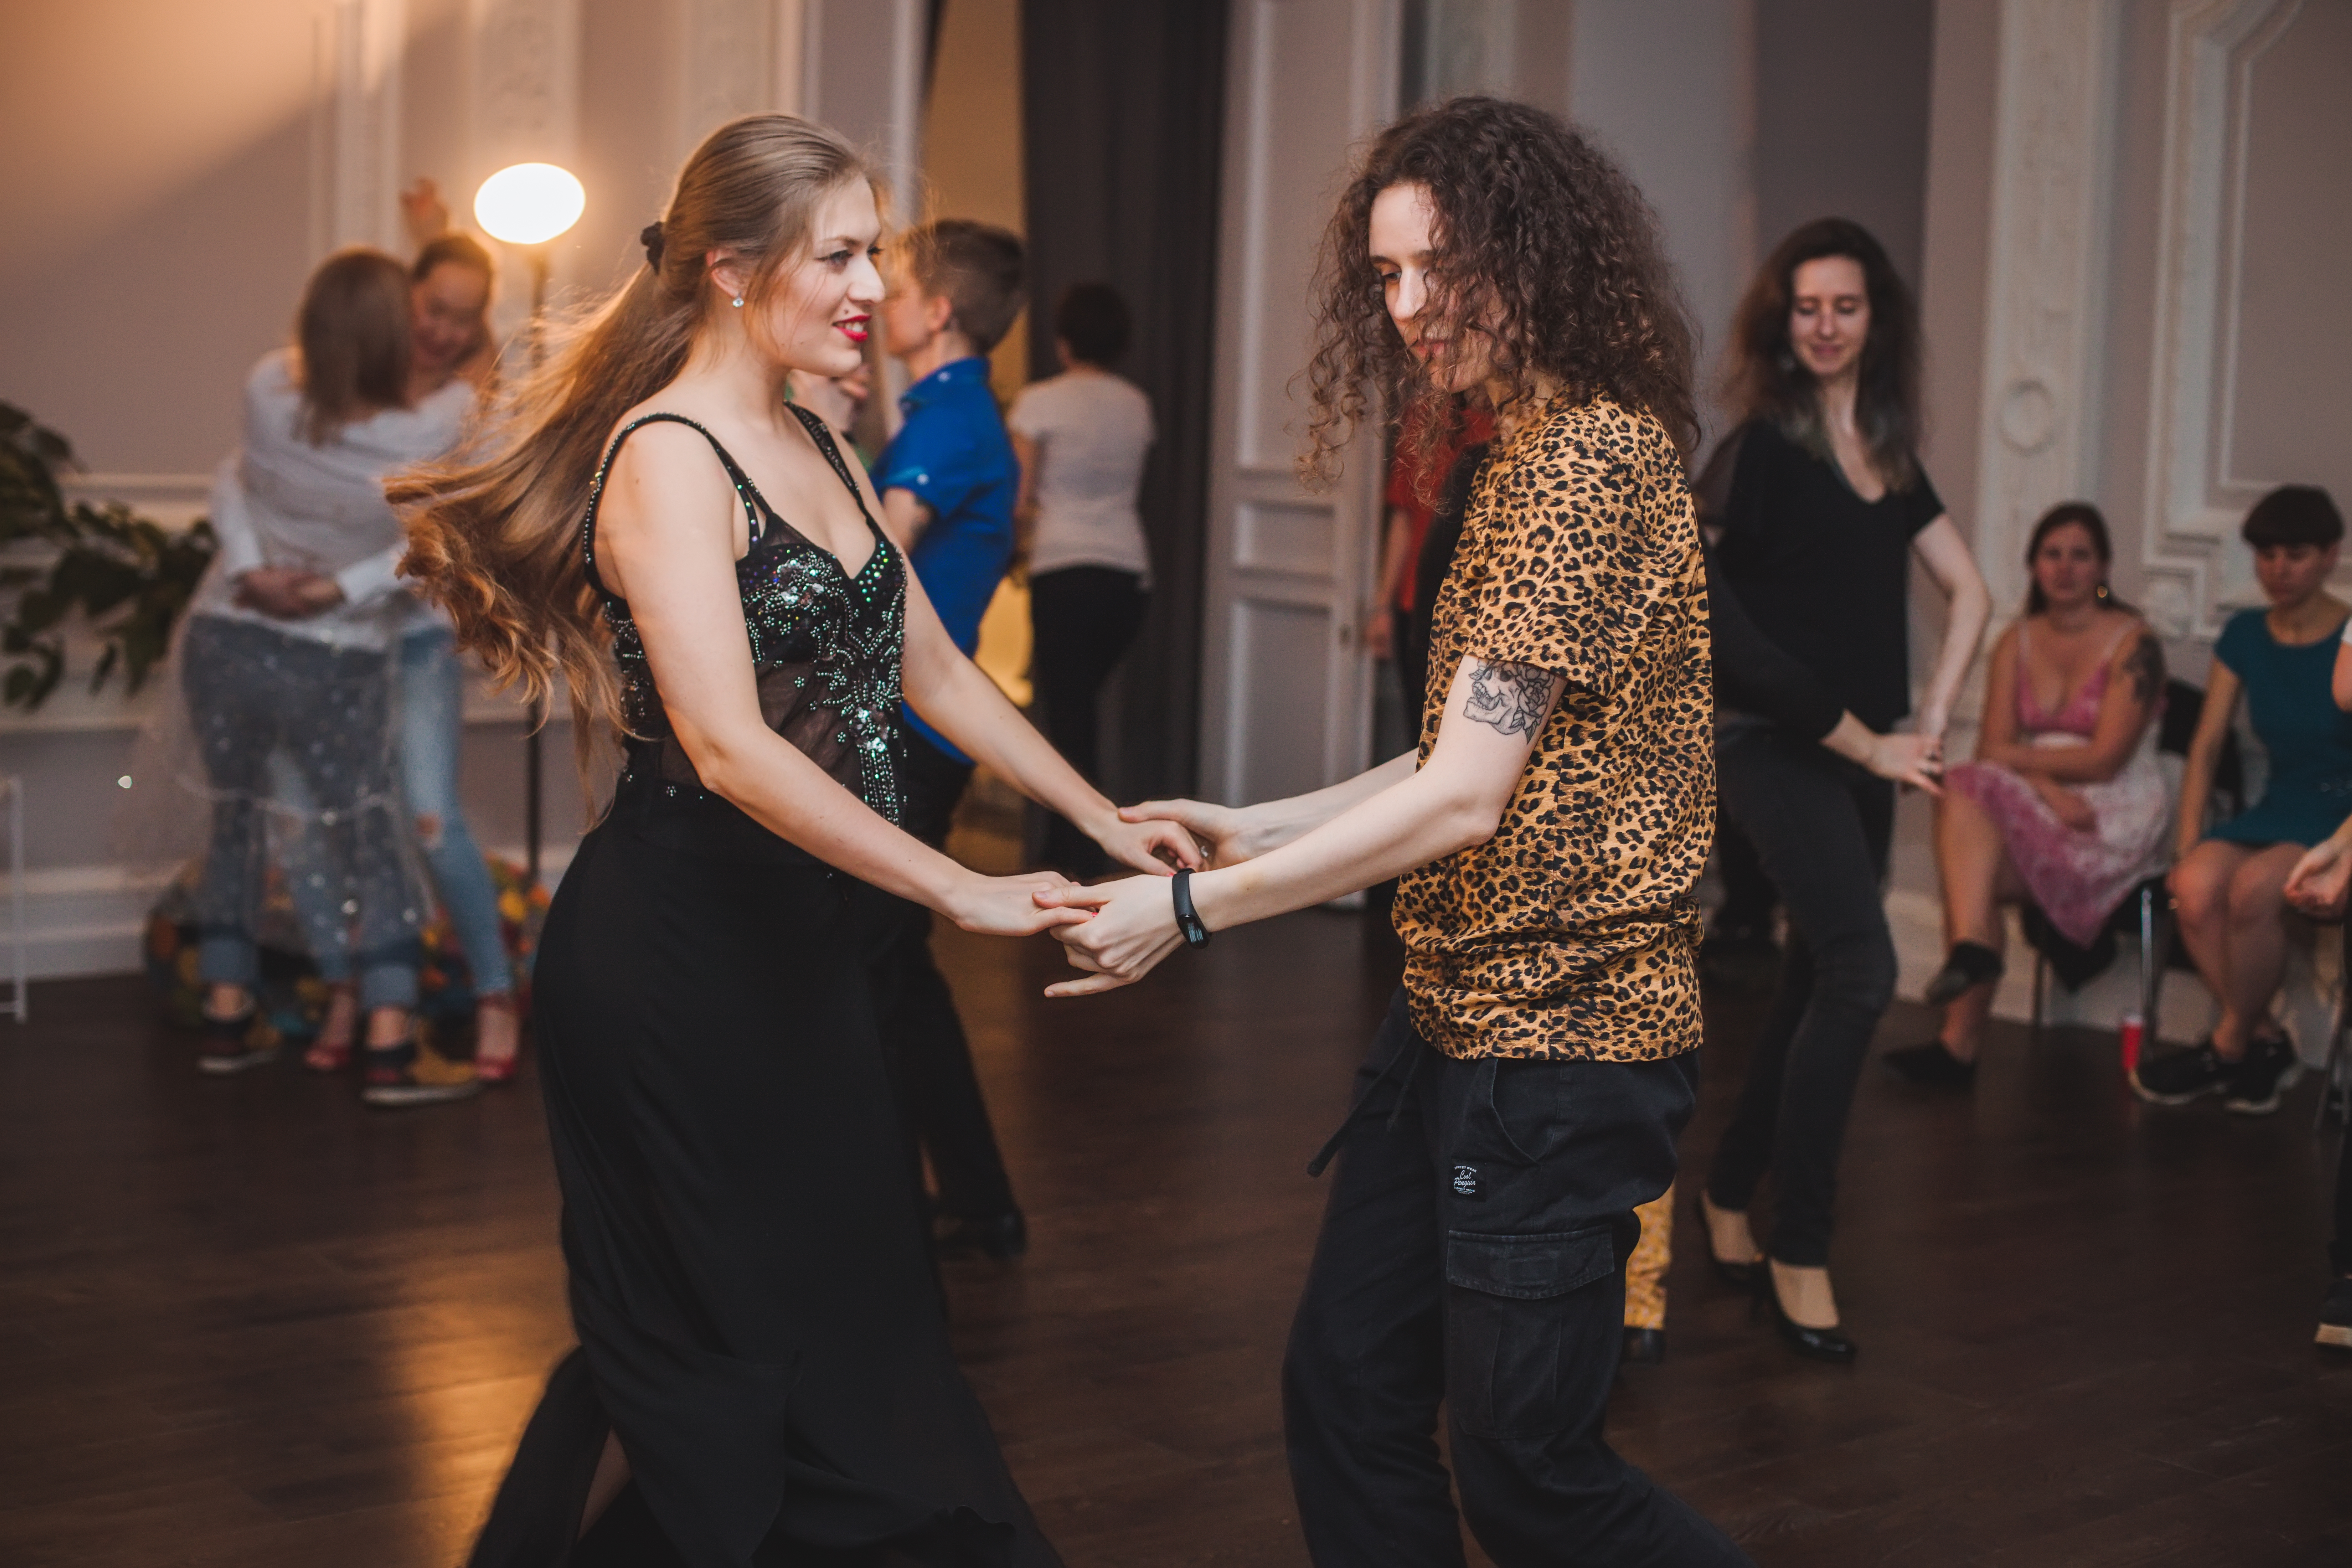 Two people dance at a studio